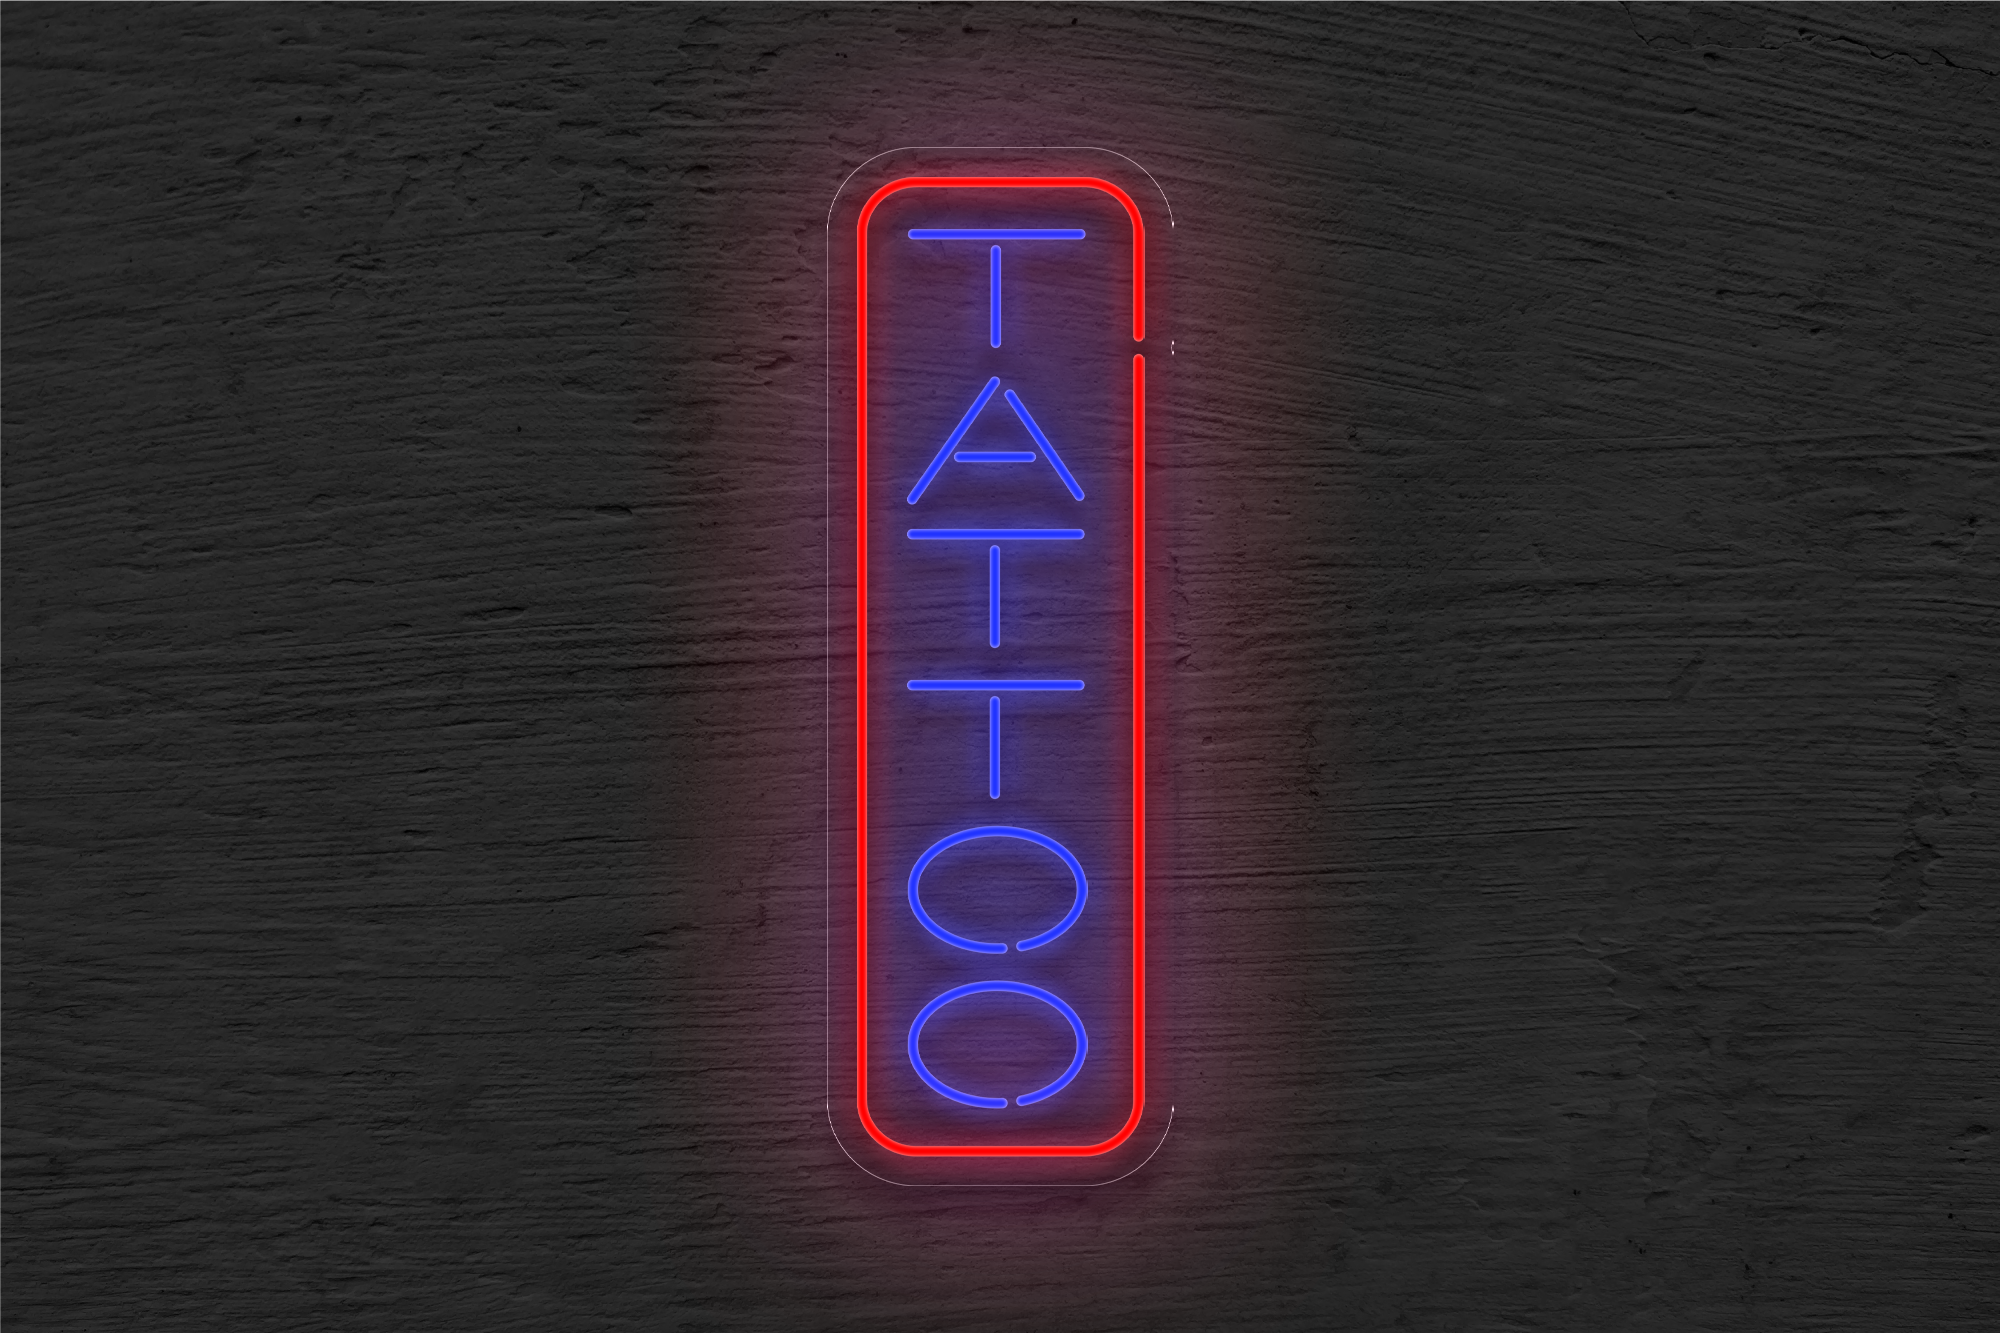 Vertical "Tattoo" with Border LED Neon Sign